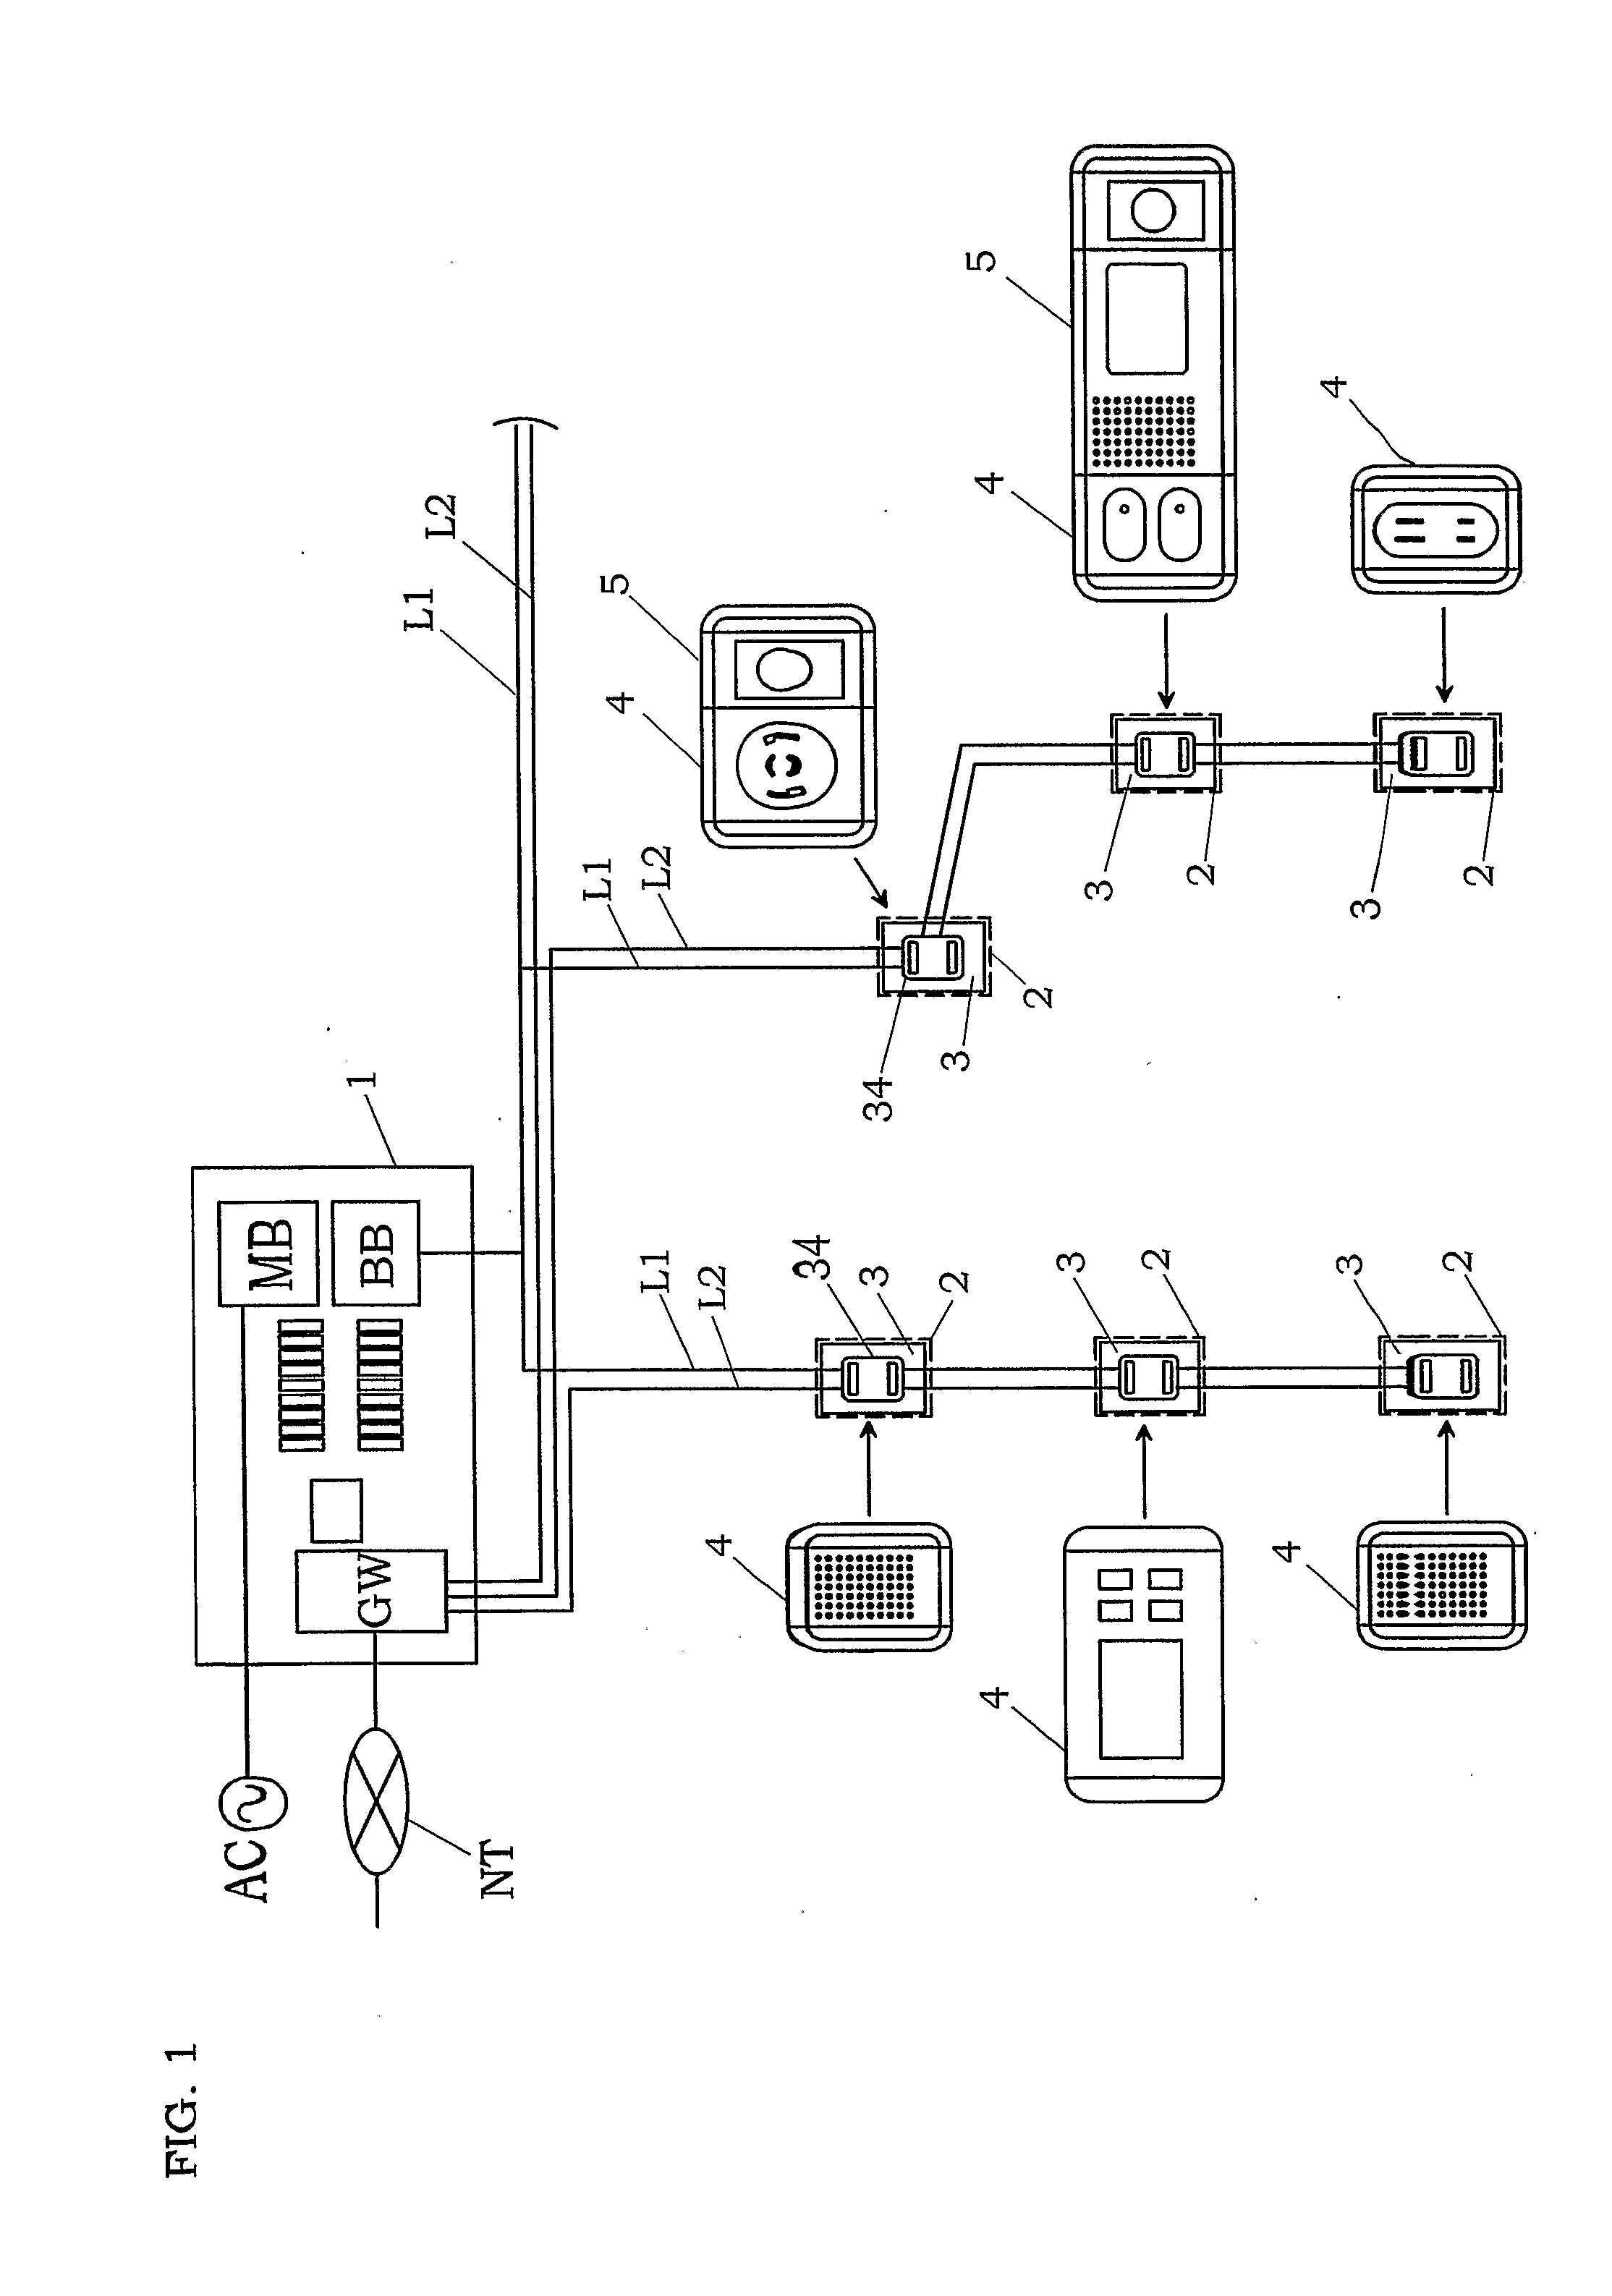 Function Unit for Dual Wiring System